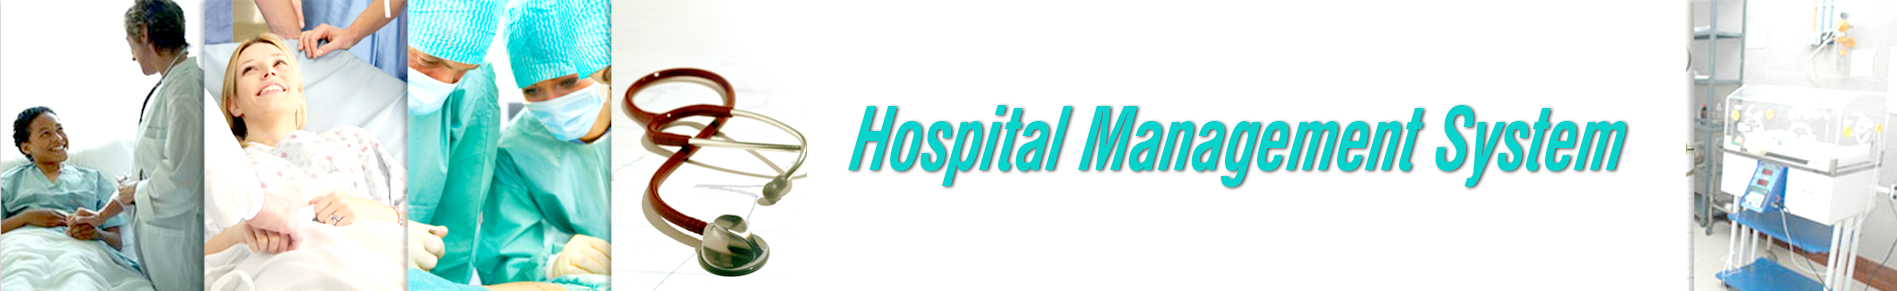 Hospital Management Software in Chennai | Hospital Management System in Chennai | Health care & Clinic software in Chennai - cwd.co.in